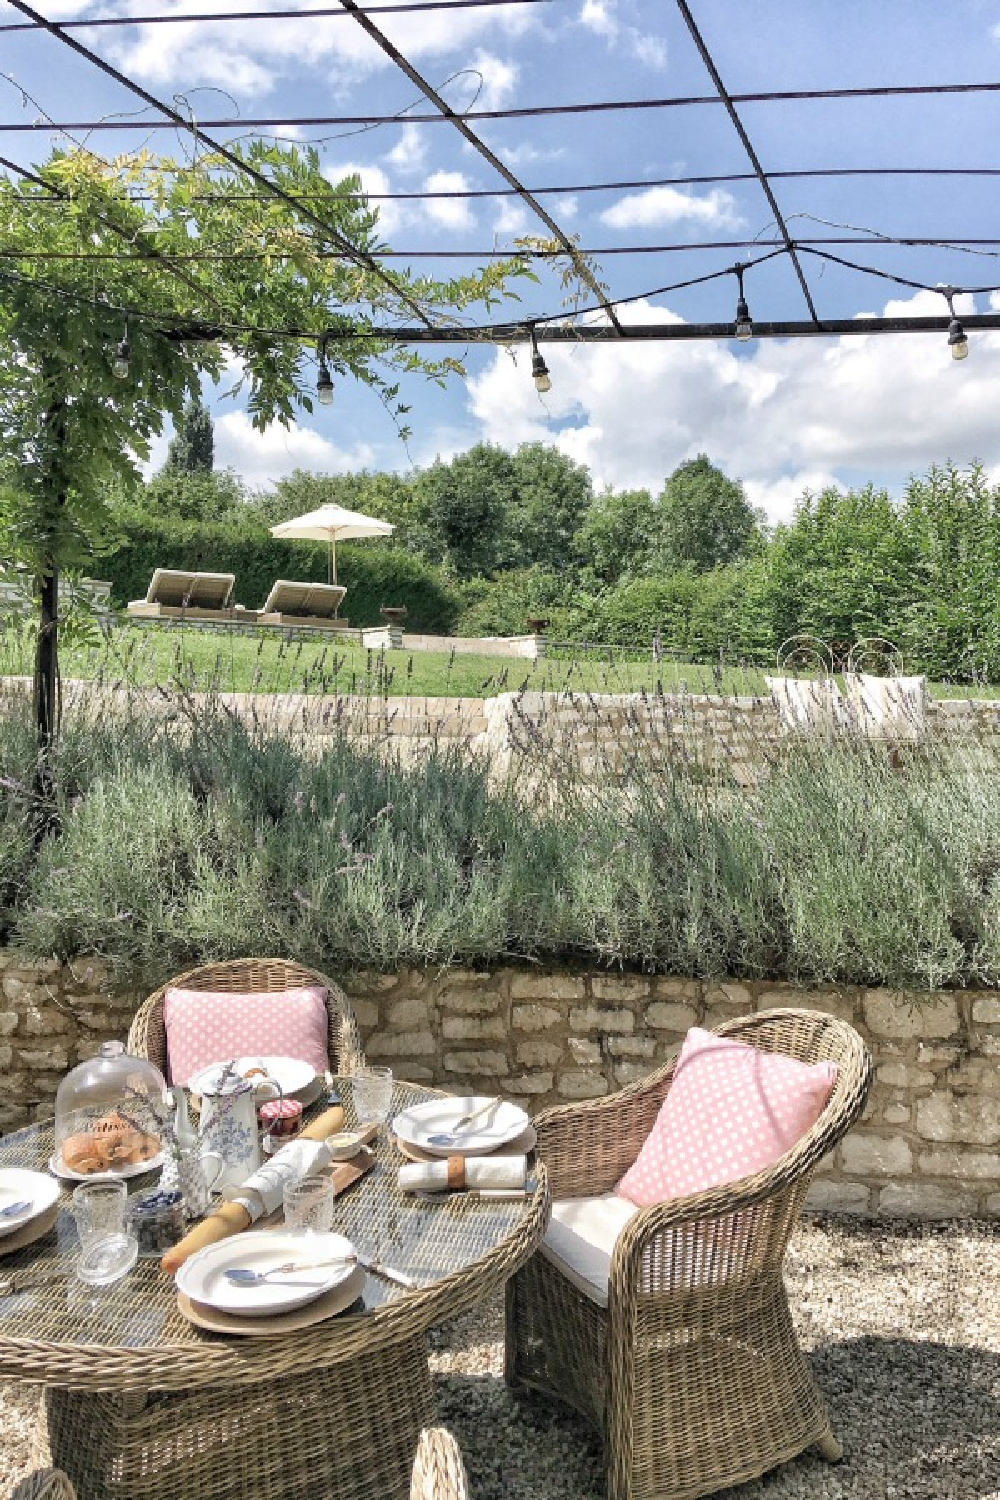 French farmhouse outdoor dining table with check tablecloth - Vivi et Margot.